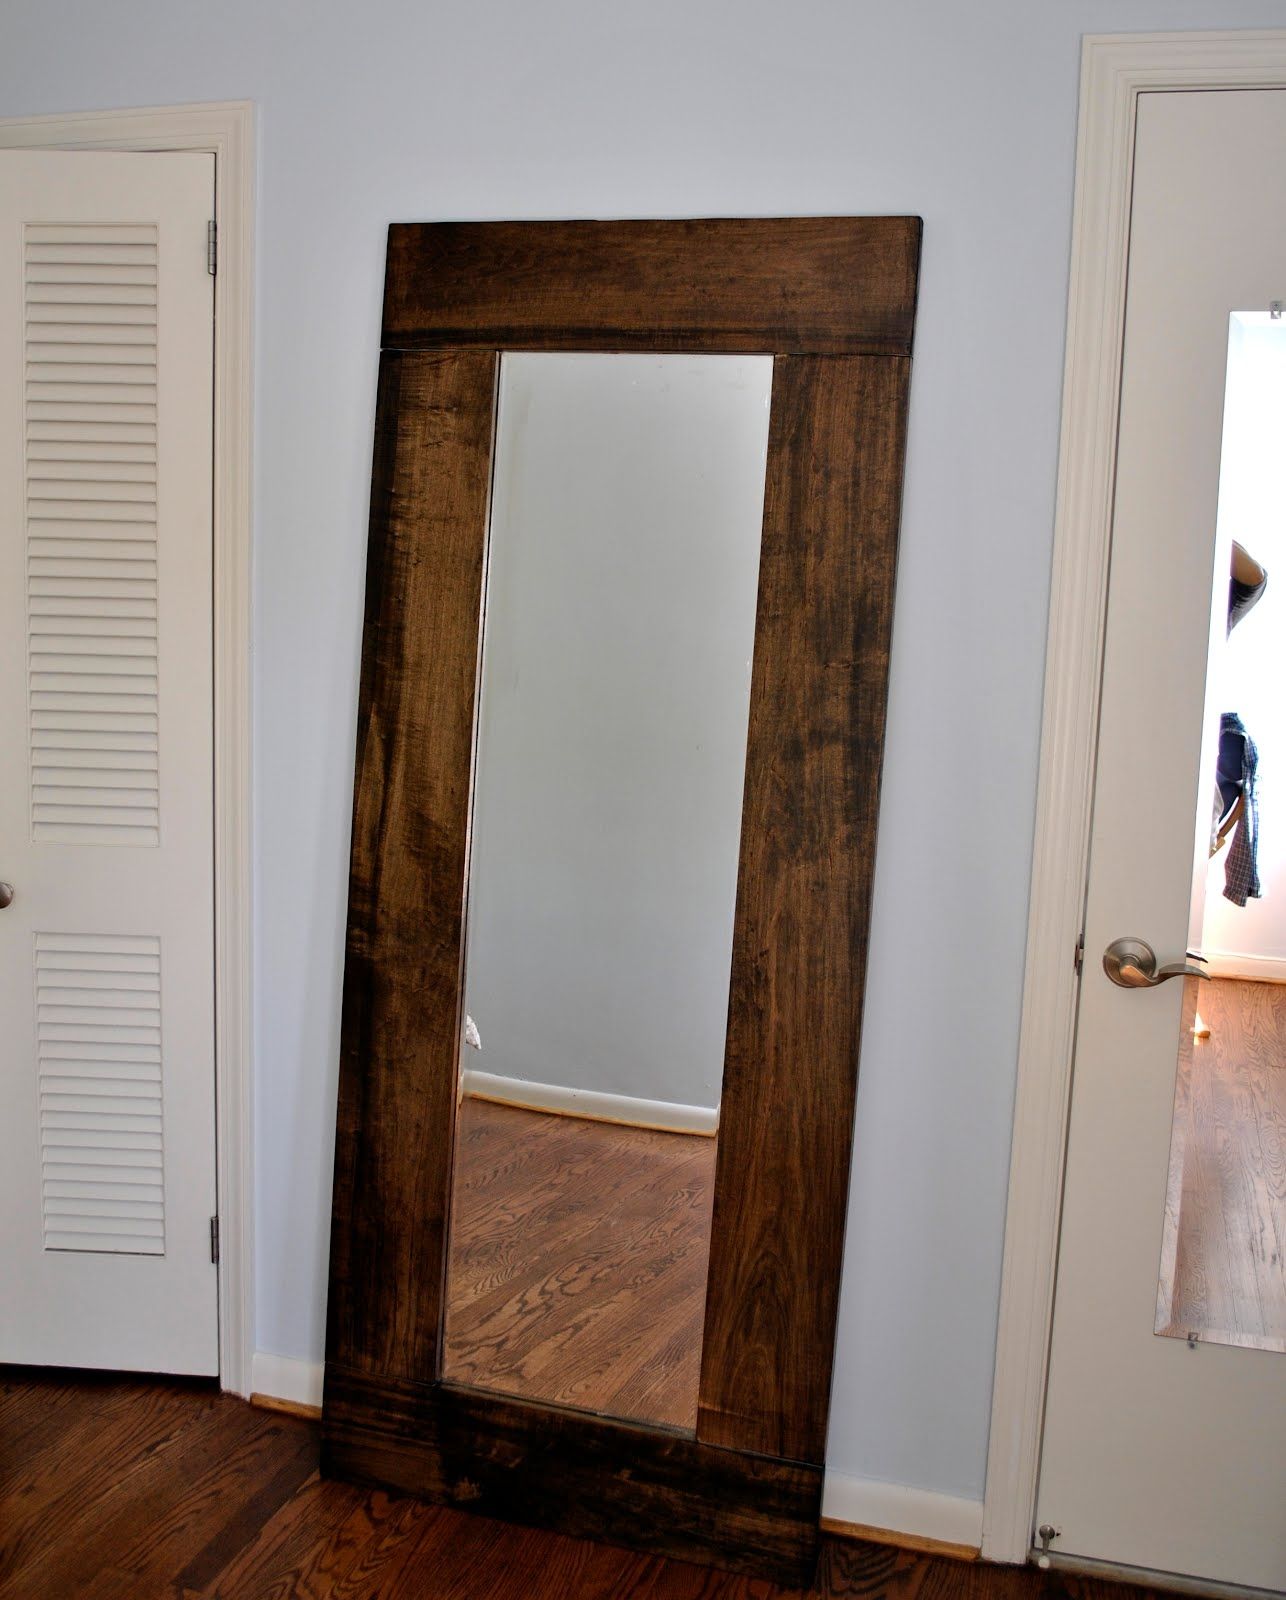 Astonishing Design Wood Framed Wall Mirrors Fancy Bathroom Mirrors Intended For Fancy Mirrors For Sale (View 6 of 14)